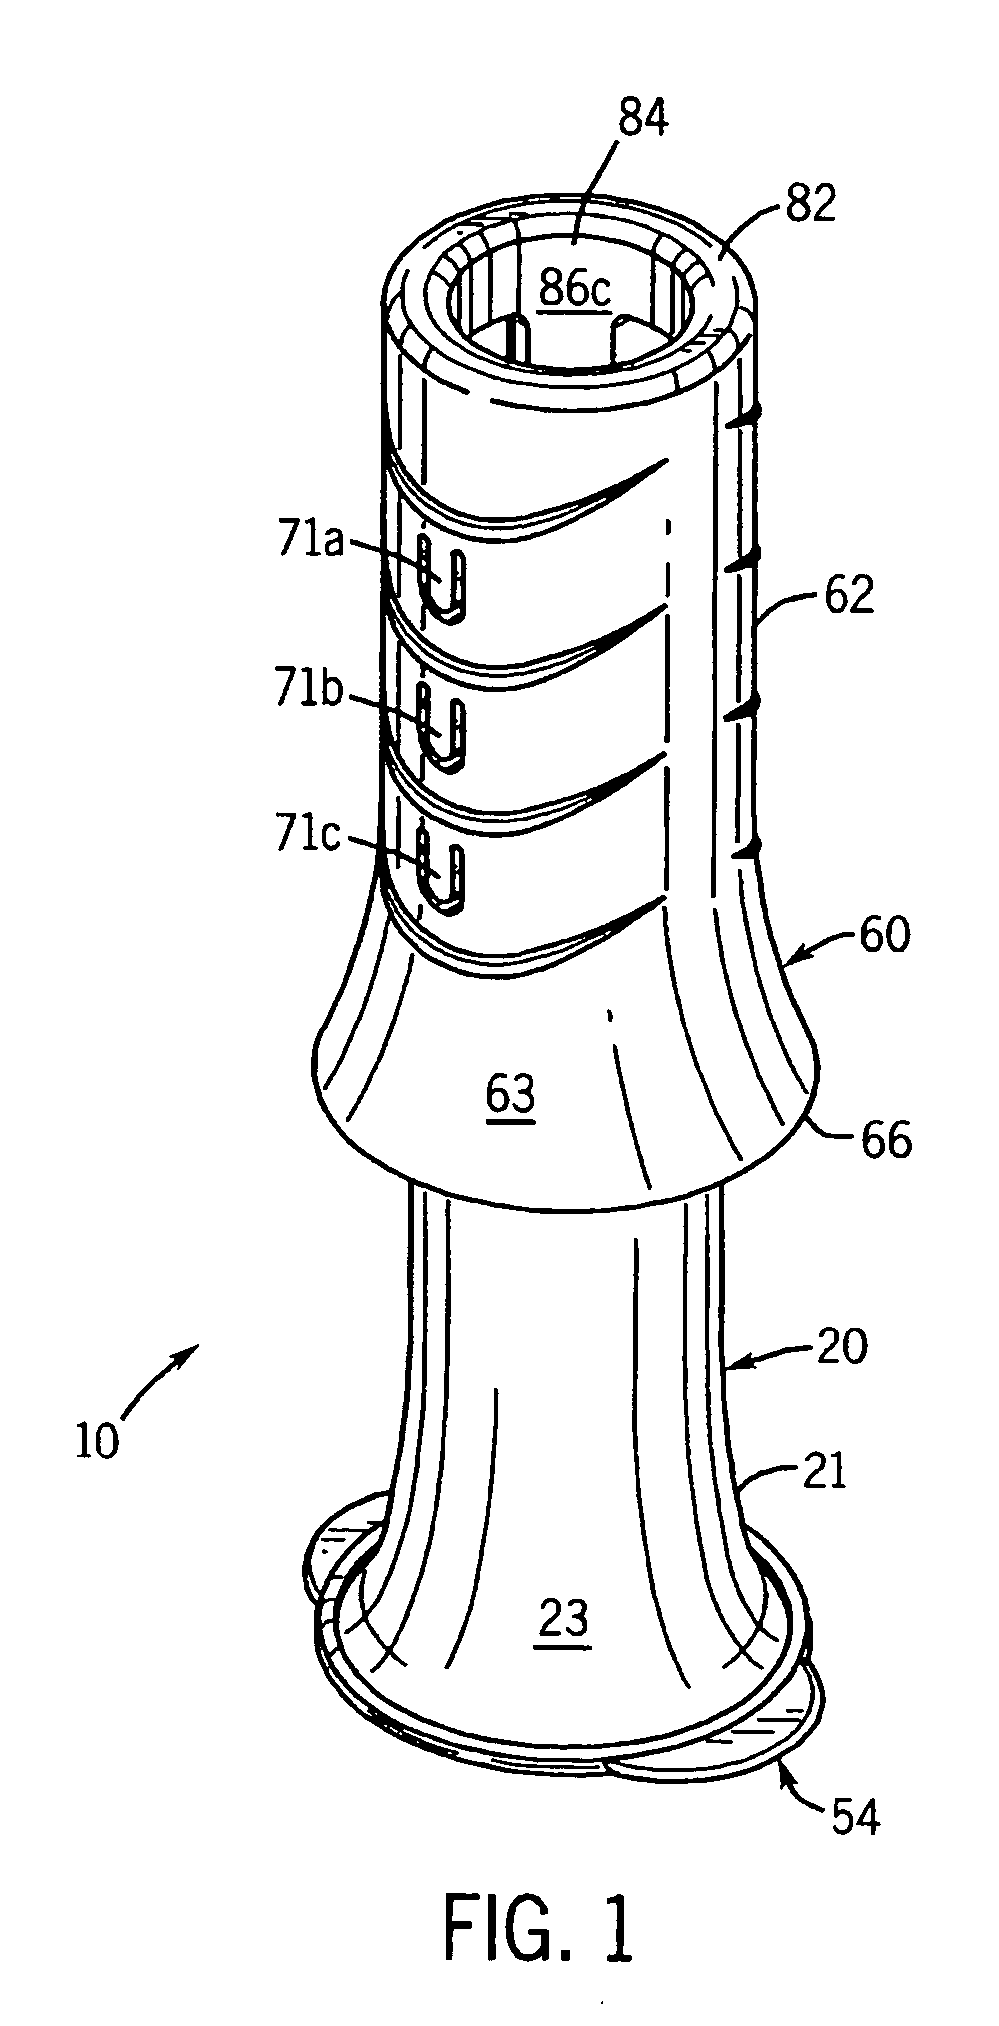 Device for dispensing a controlled dose of a flowable material